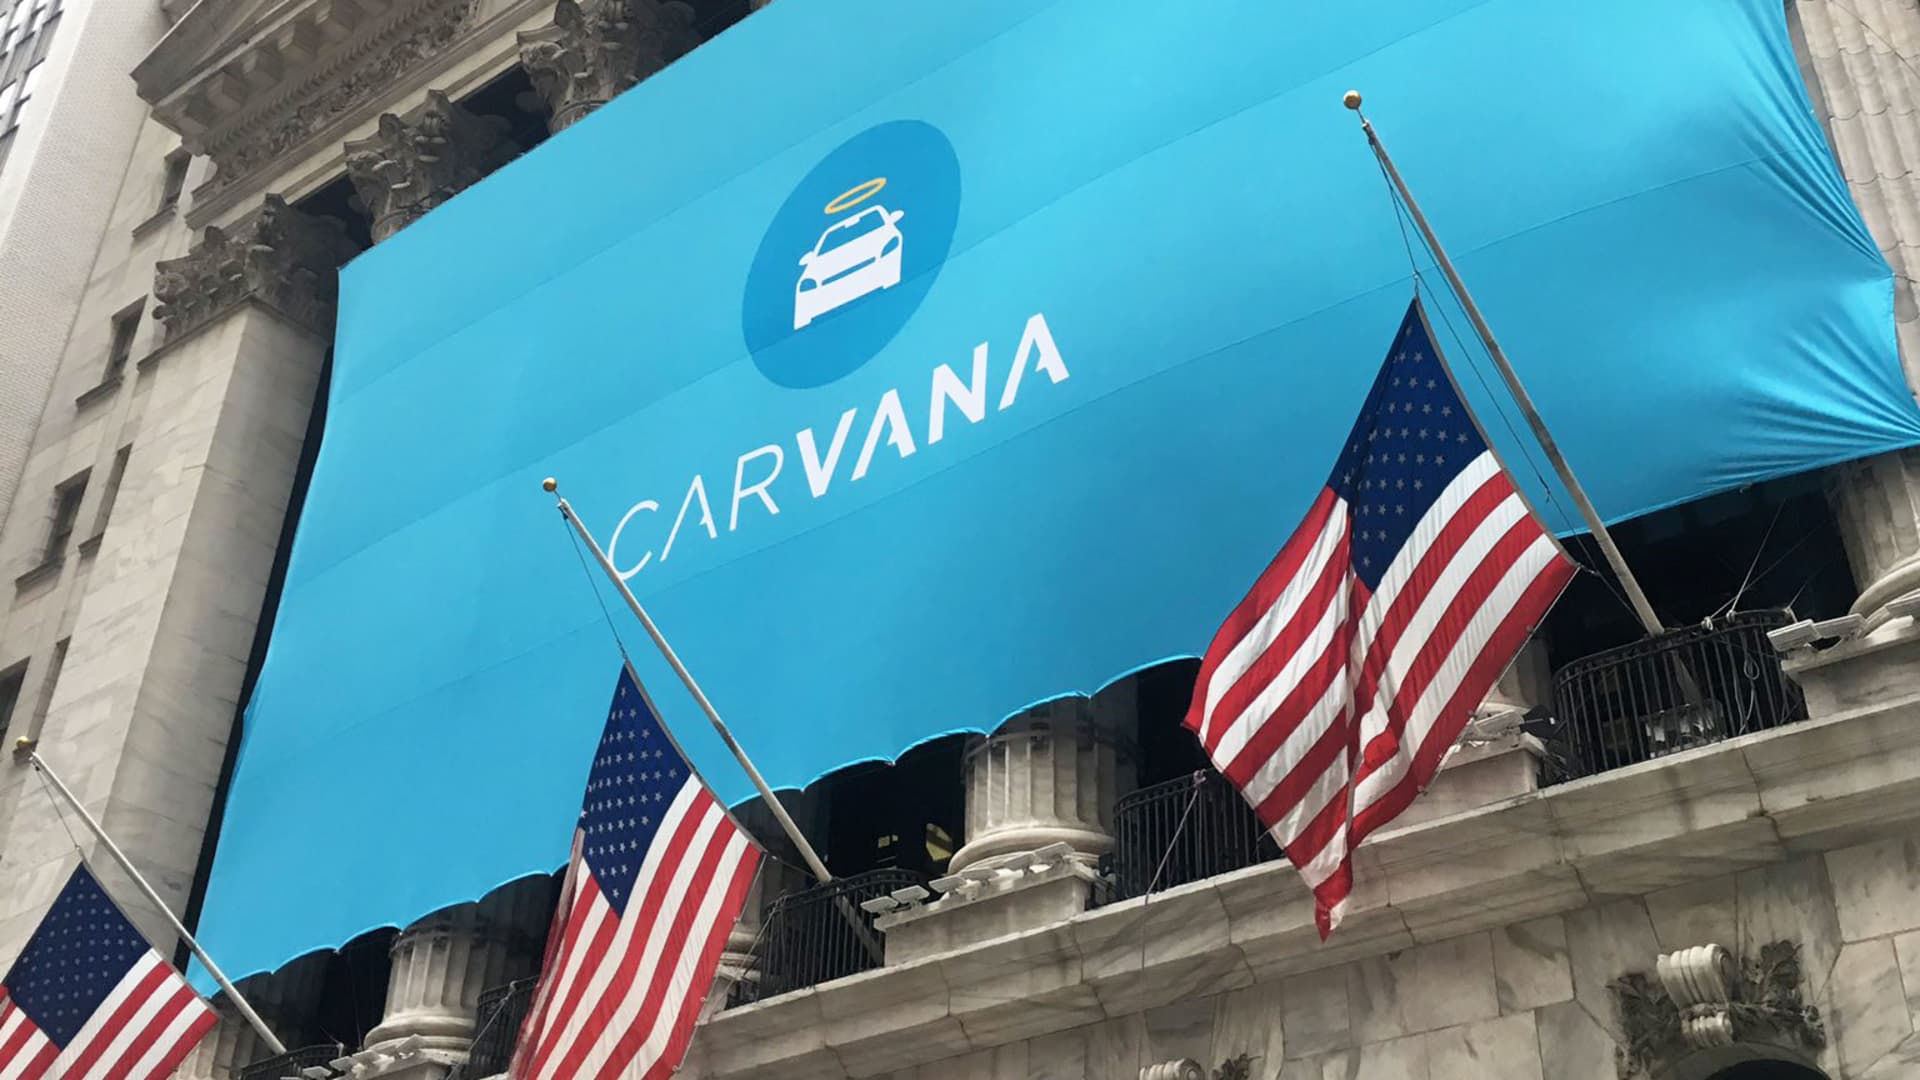 Sell Carvana as the company's current tailwinds aren't sustainable, Jefferies says